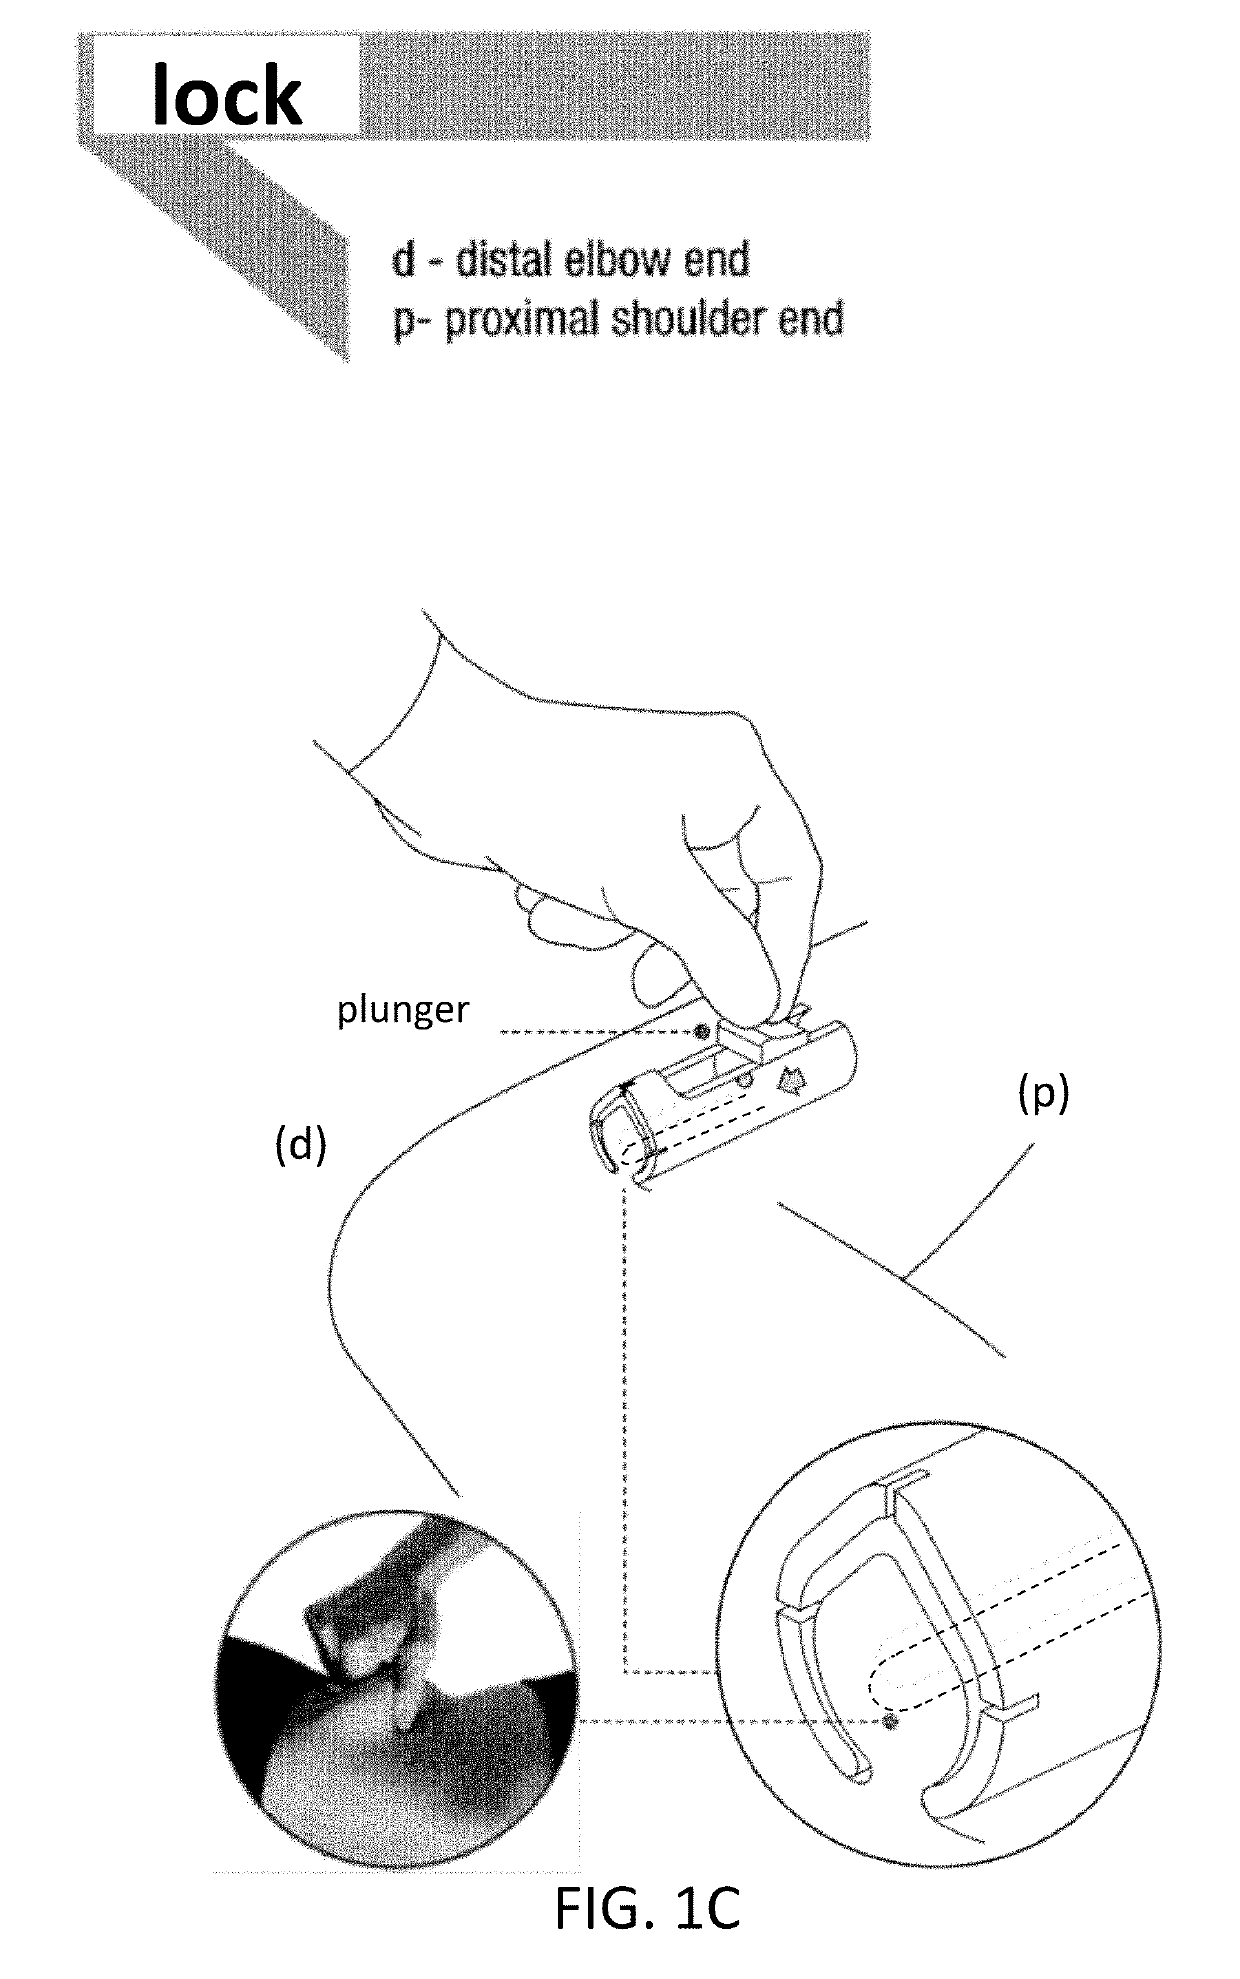 Device for Removing an Item Implanted Underneath the Skin